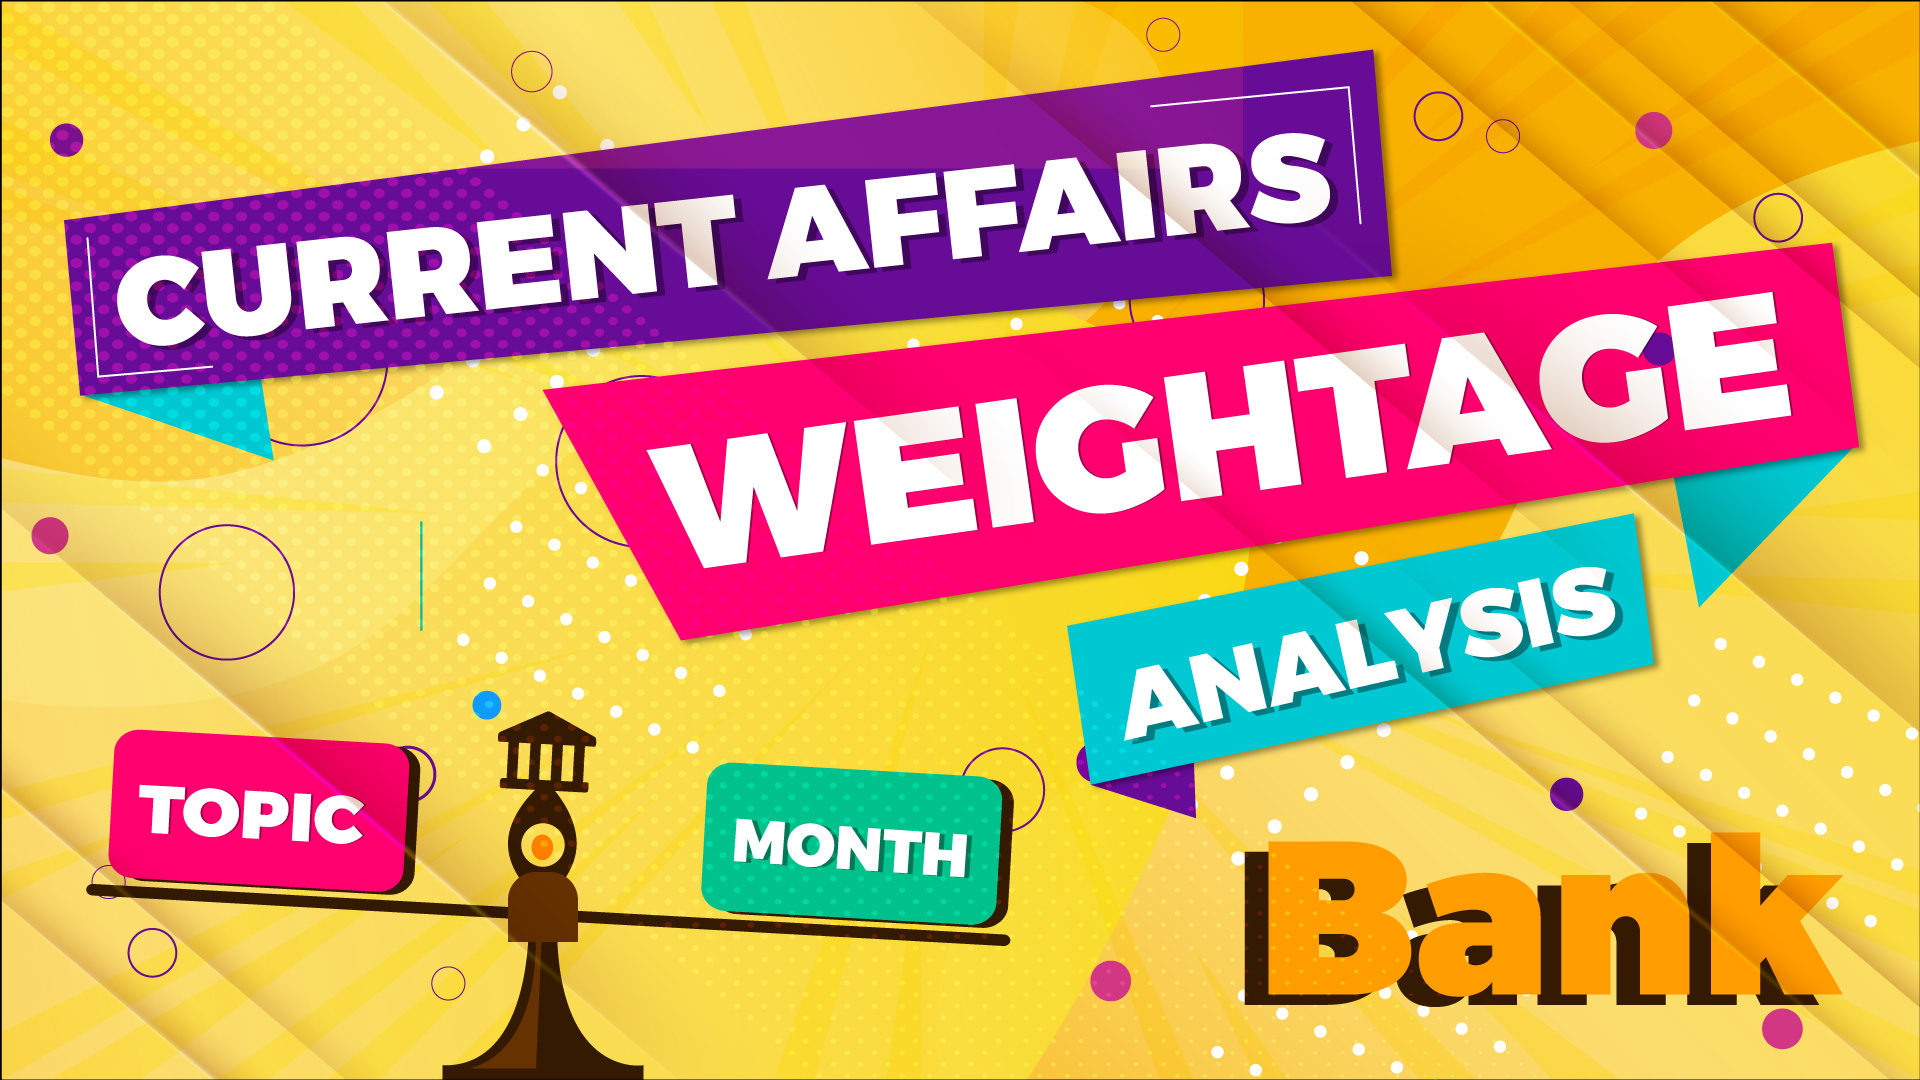 CURRENT AFFAIRS Topic WEIGHT-ANALYSIS